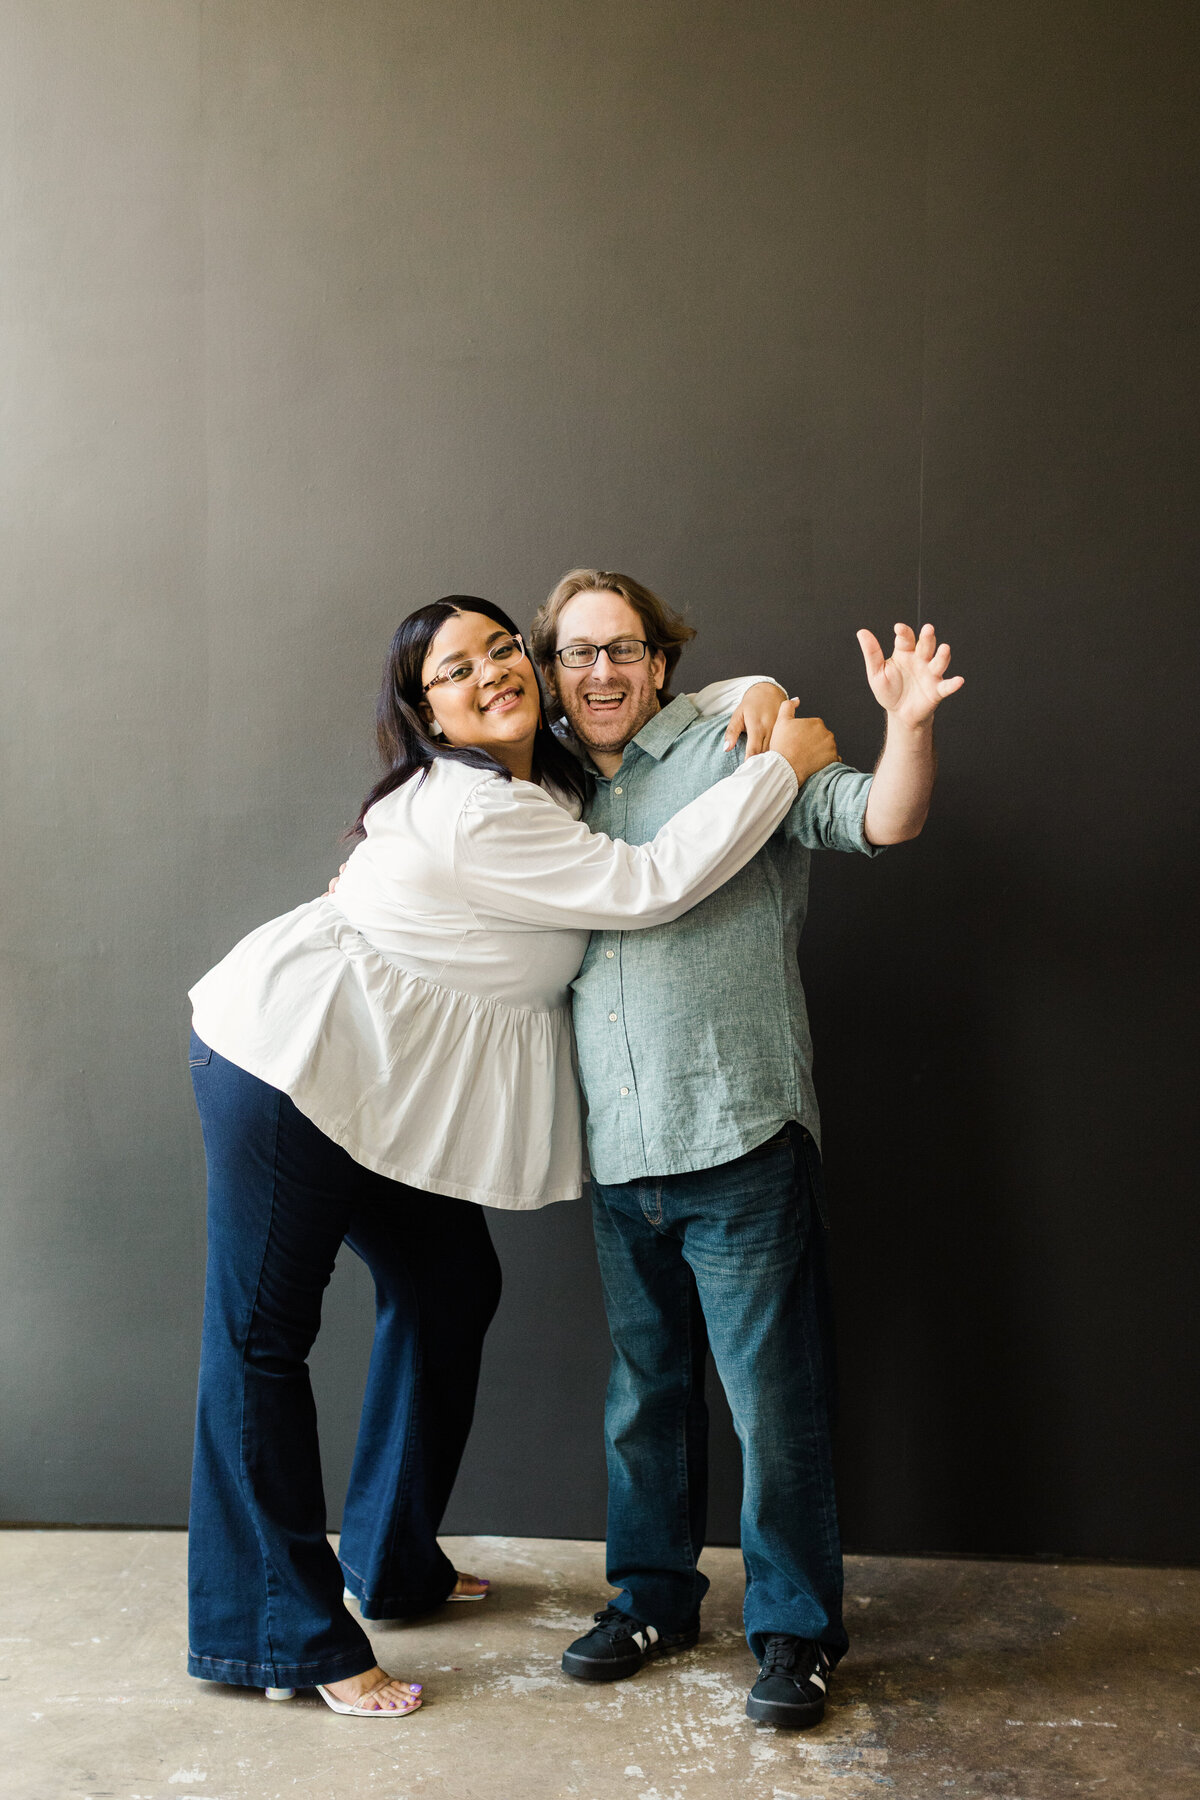 A couple playfully posing in front of a black background during their studio engagement photoshoot in Dallas, Texas. The woman on the left is wrapping her arms around the man on the right. She is wearing a long sleeve, white blouse, jeans, and glasses. The man is wearing a short sleeve dress shirt, jeans, and glasses.